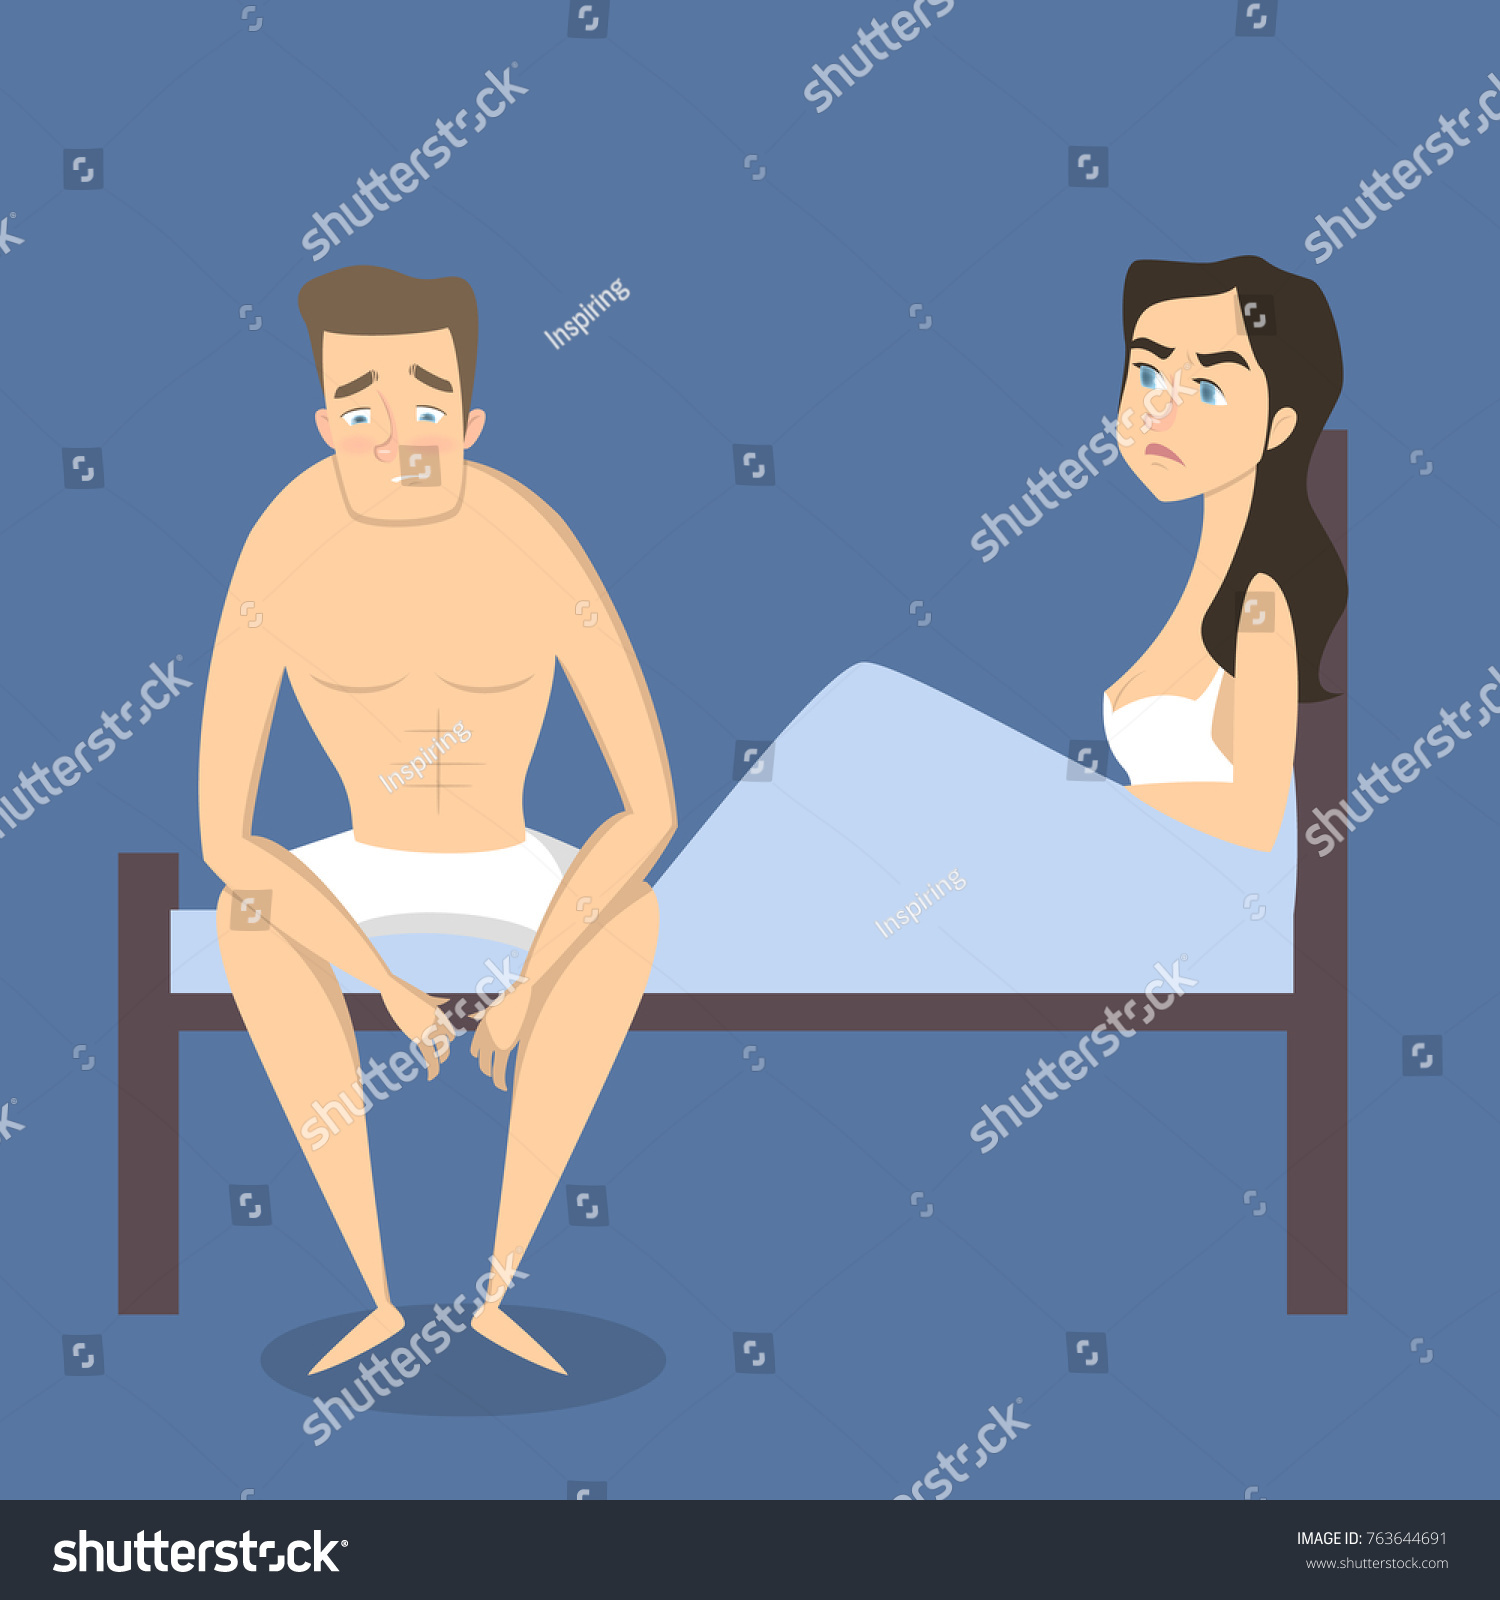 stock-vector-intimate-problem-illustration-man-with-erectile-dysfunction-and-angry-woman-763644691.jpg